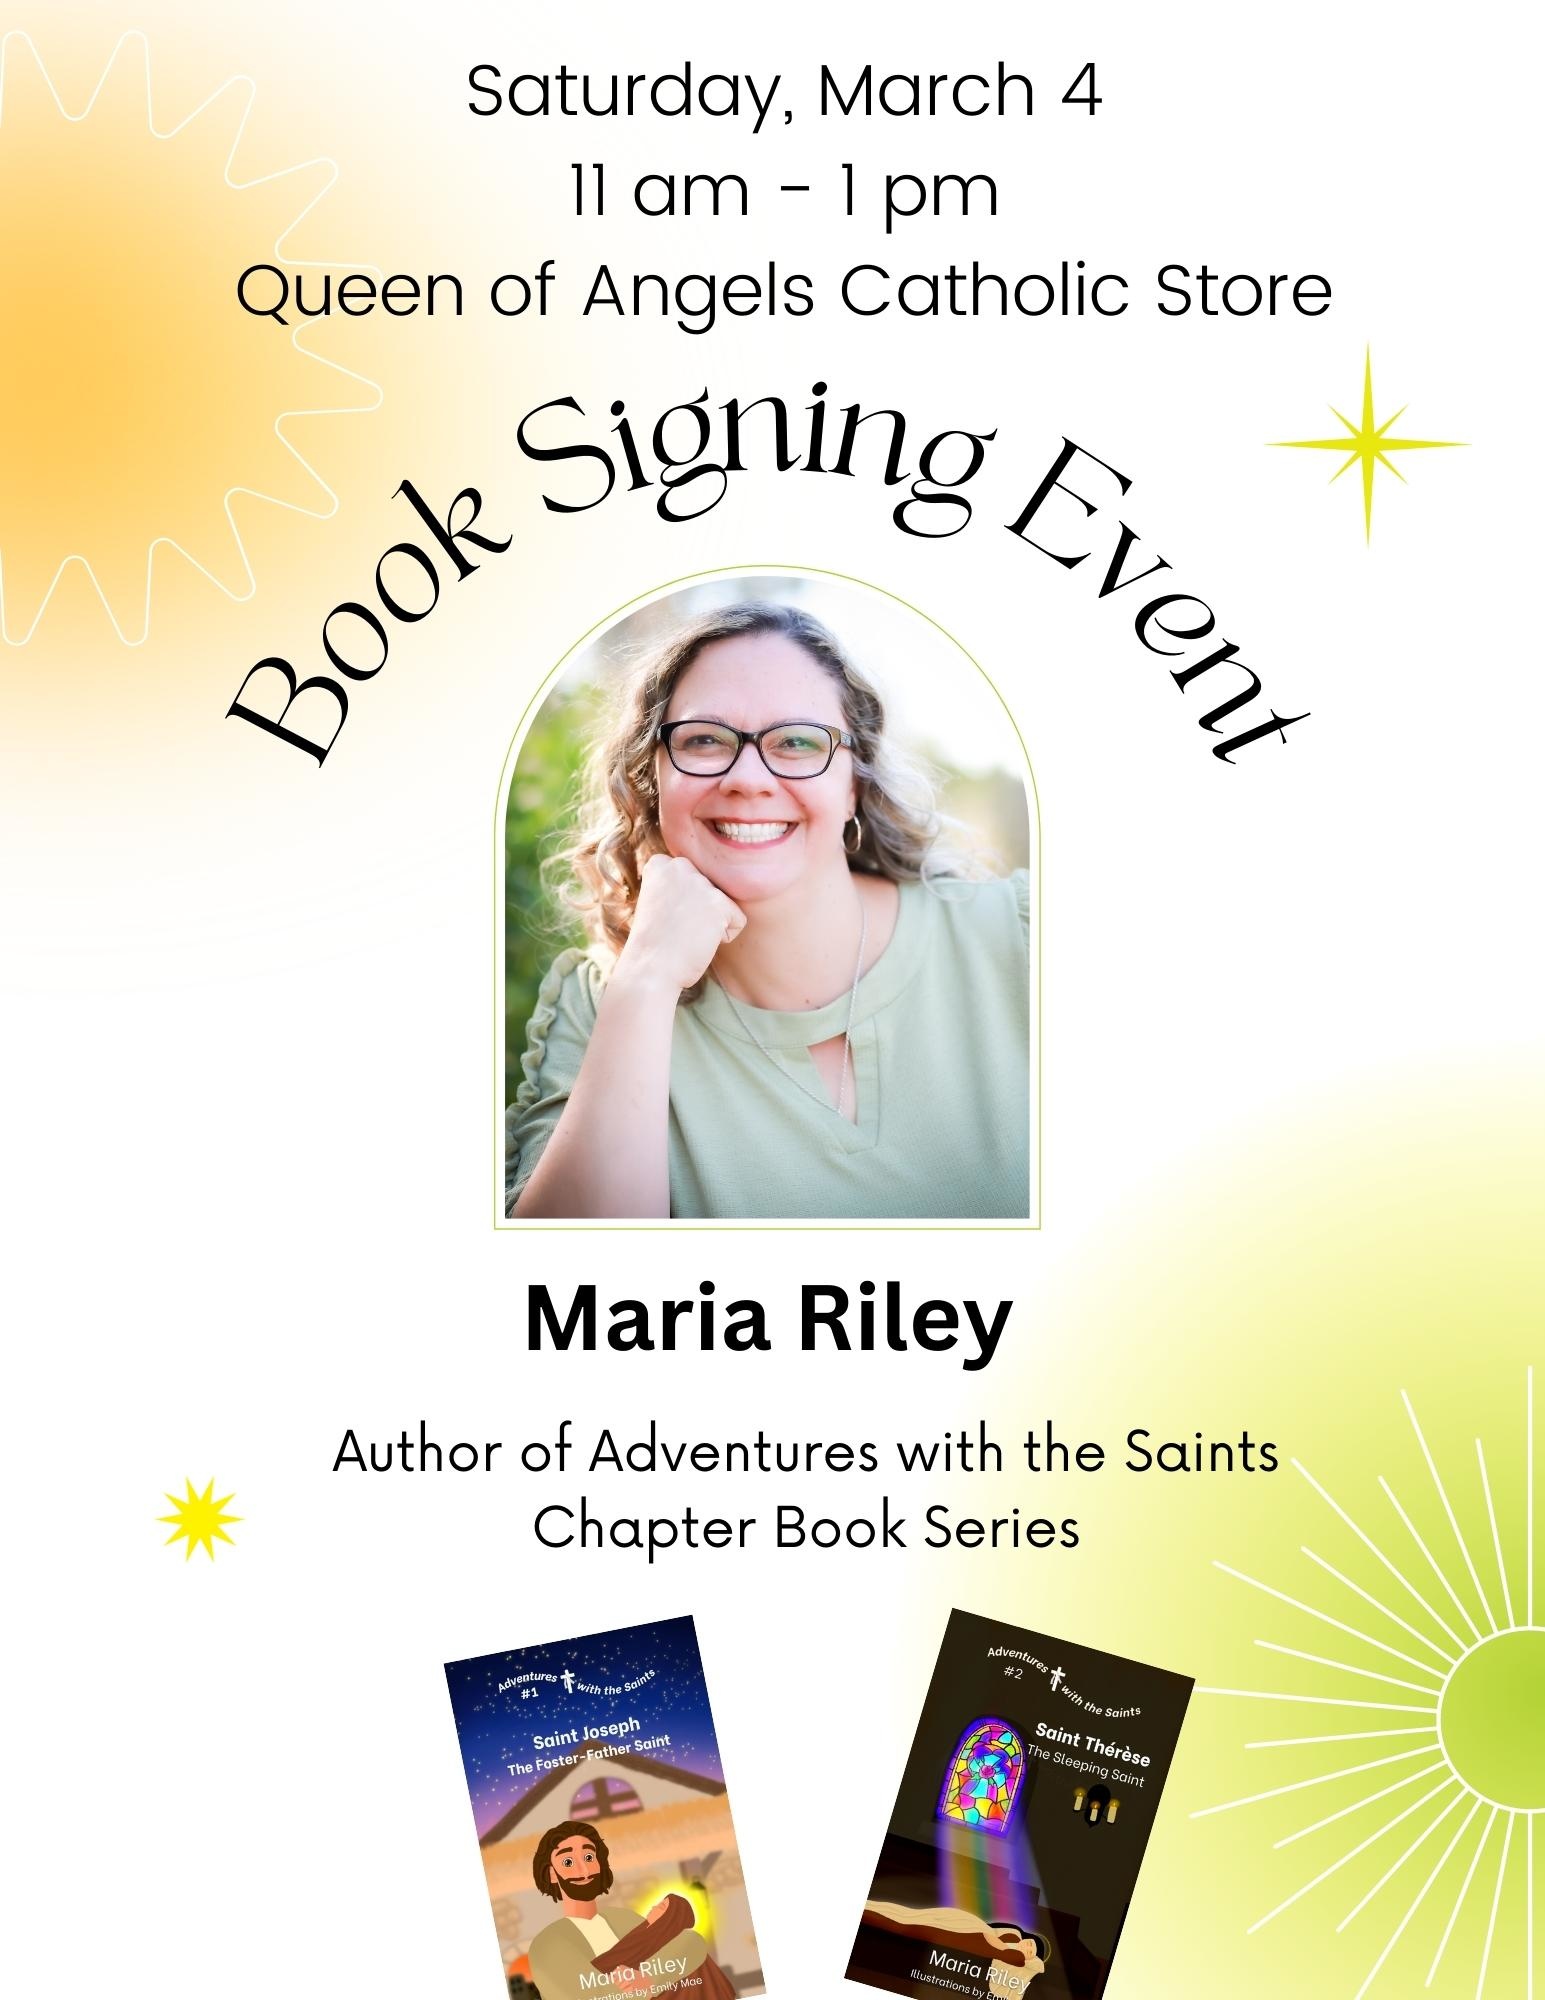 Adventures with the Saints Series Book Signing with Author Maria Riley